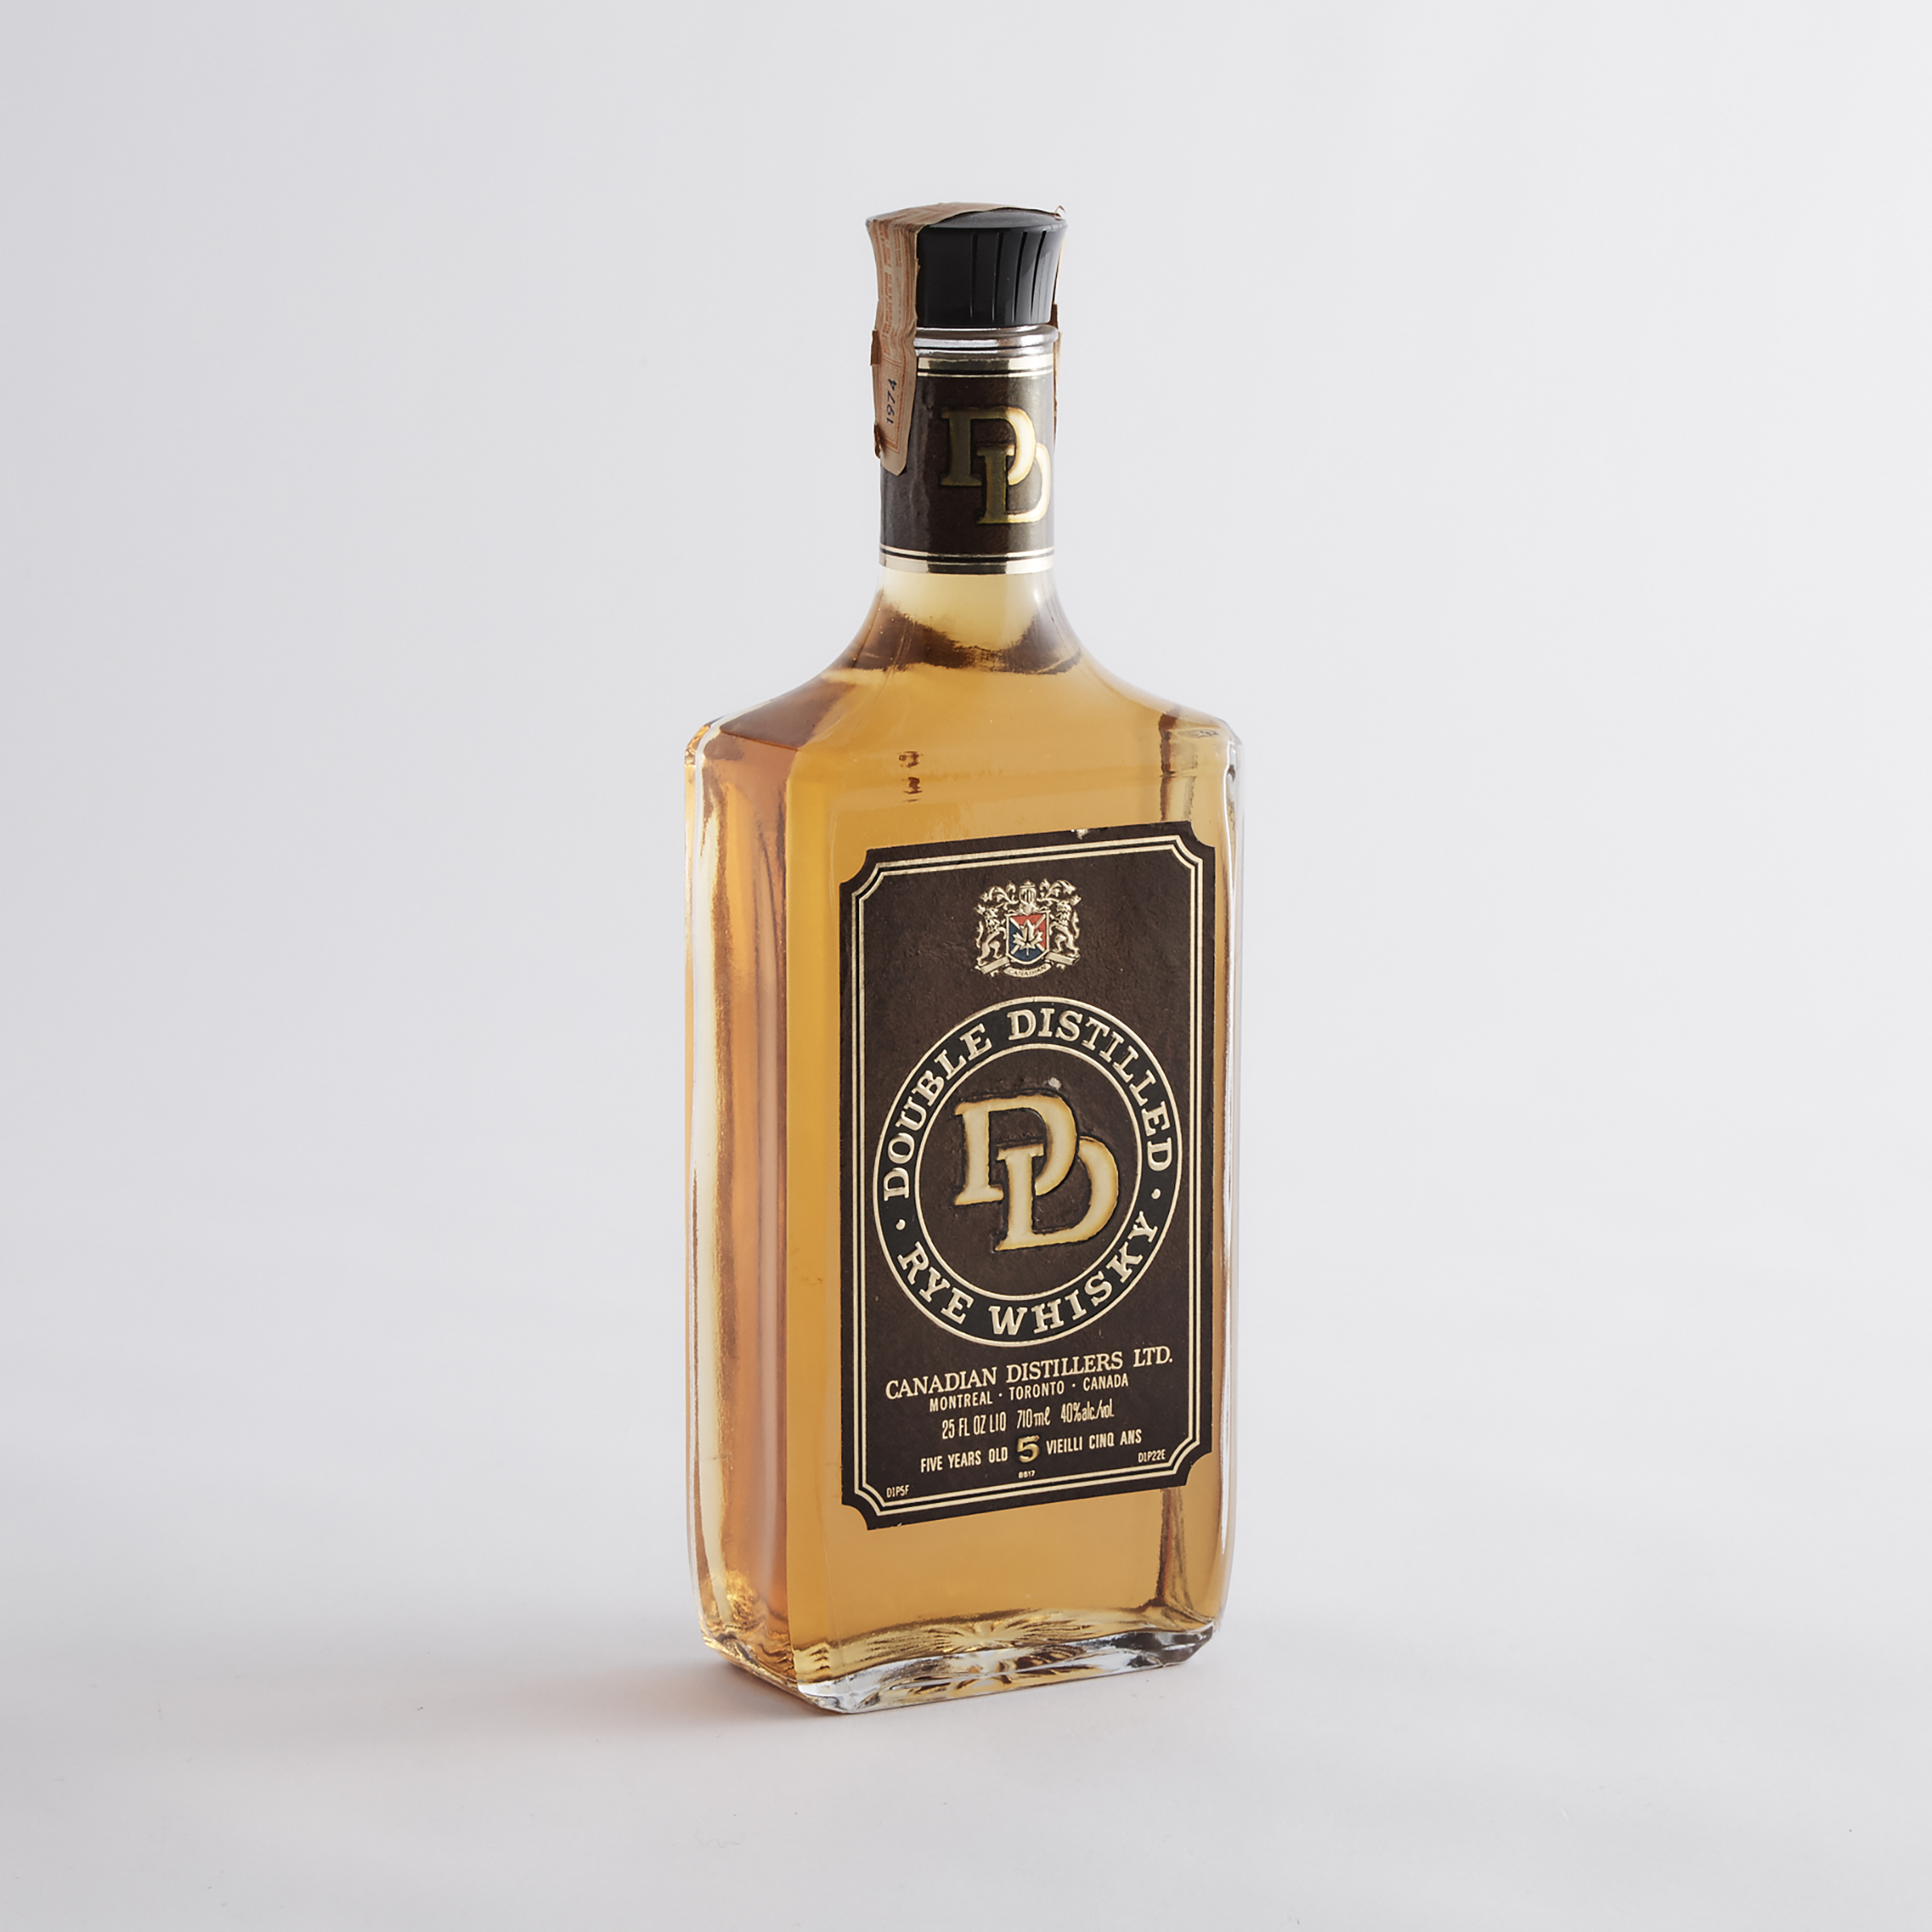 DOUBLE DISTILLED RYE WHISKY 5 YEARS (ONE 710 ML)